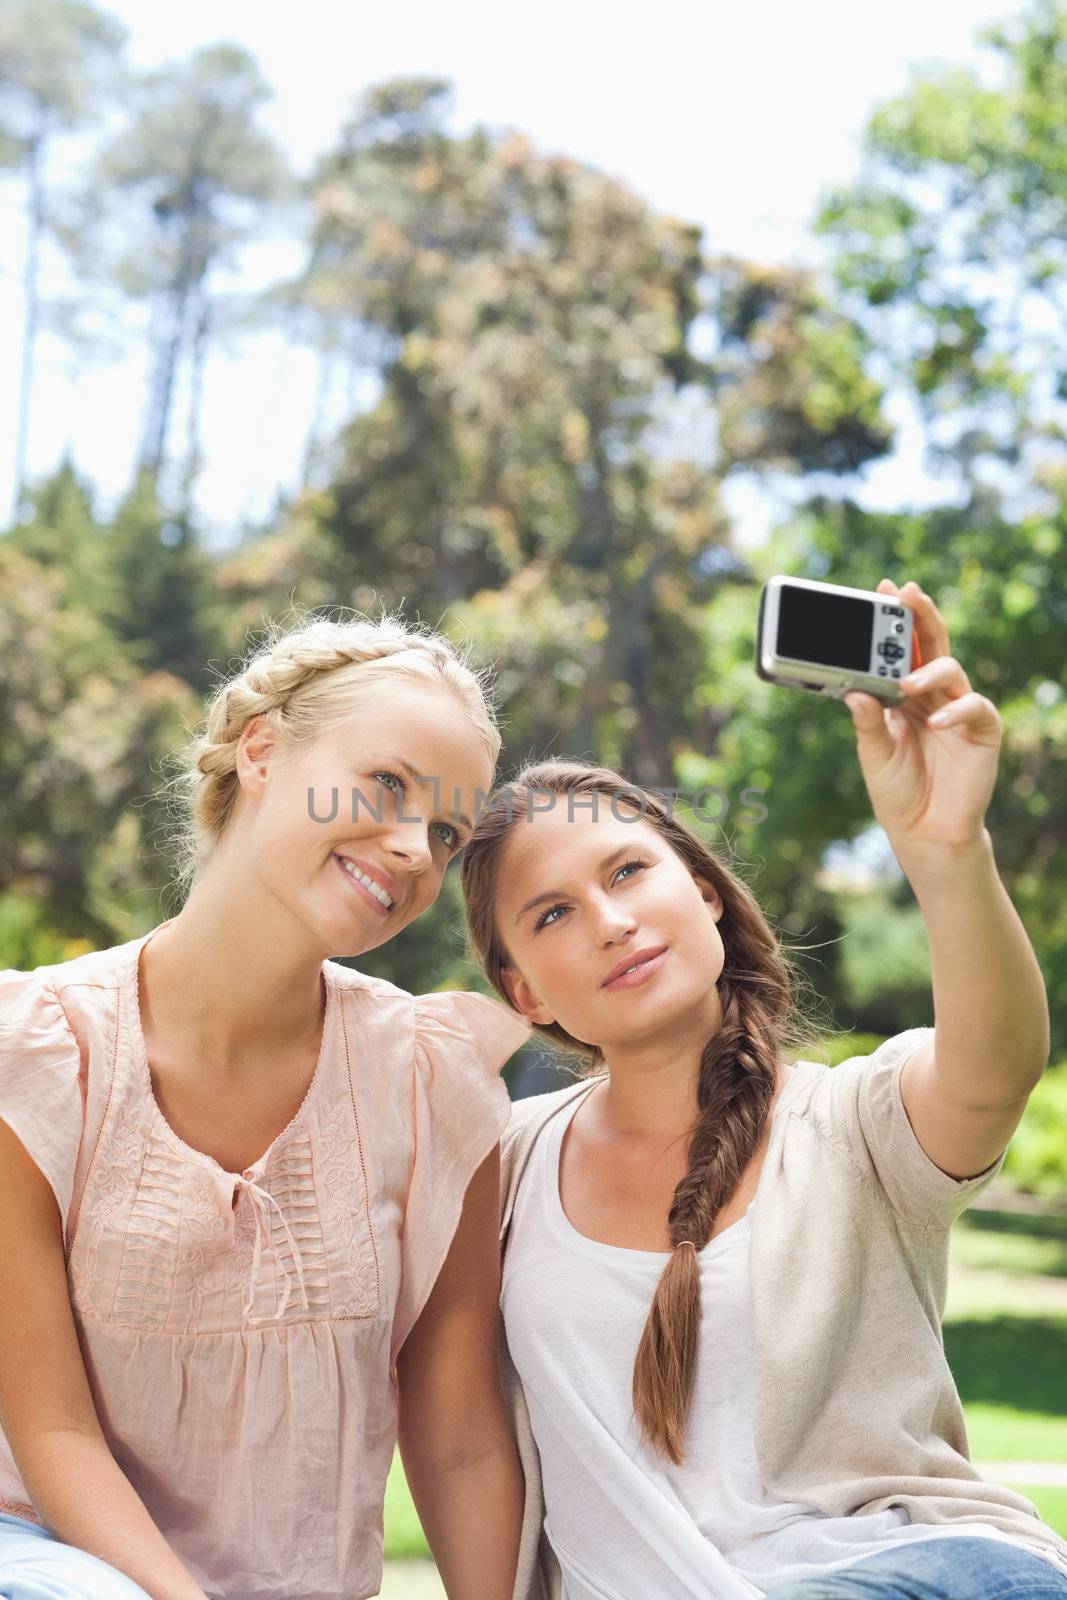 Woman taking a picture of herself and a friend by Wavebreakmedia